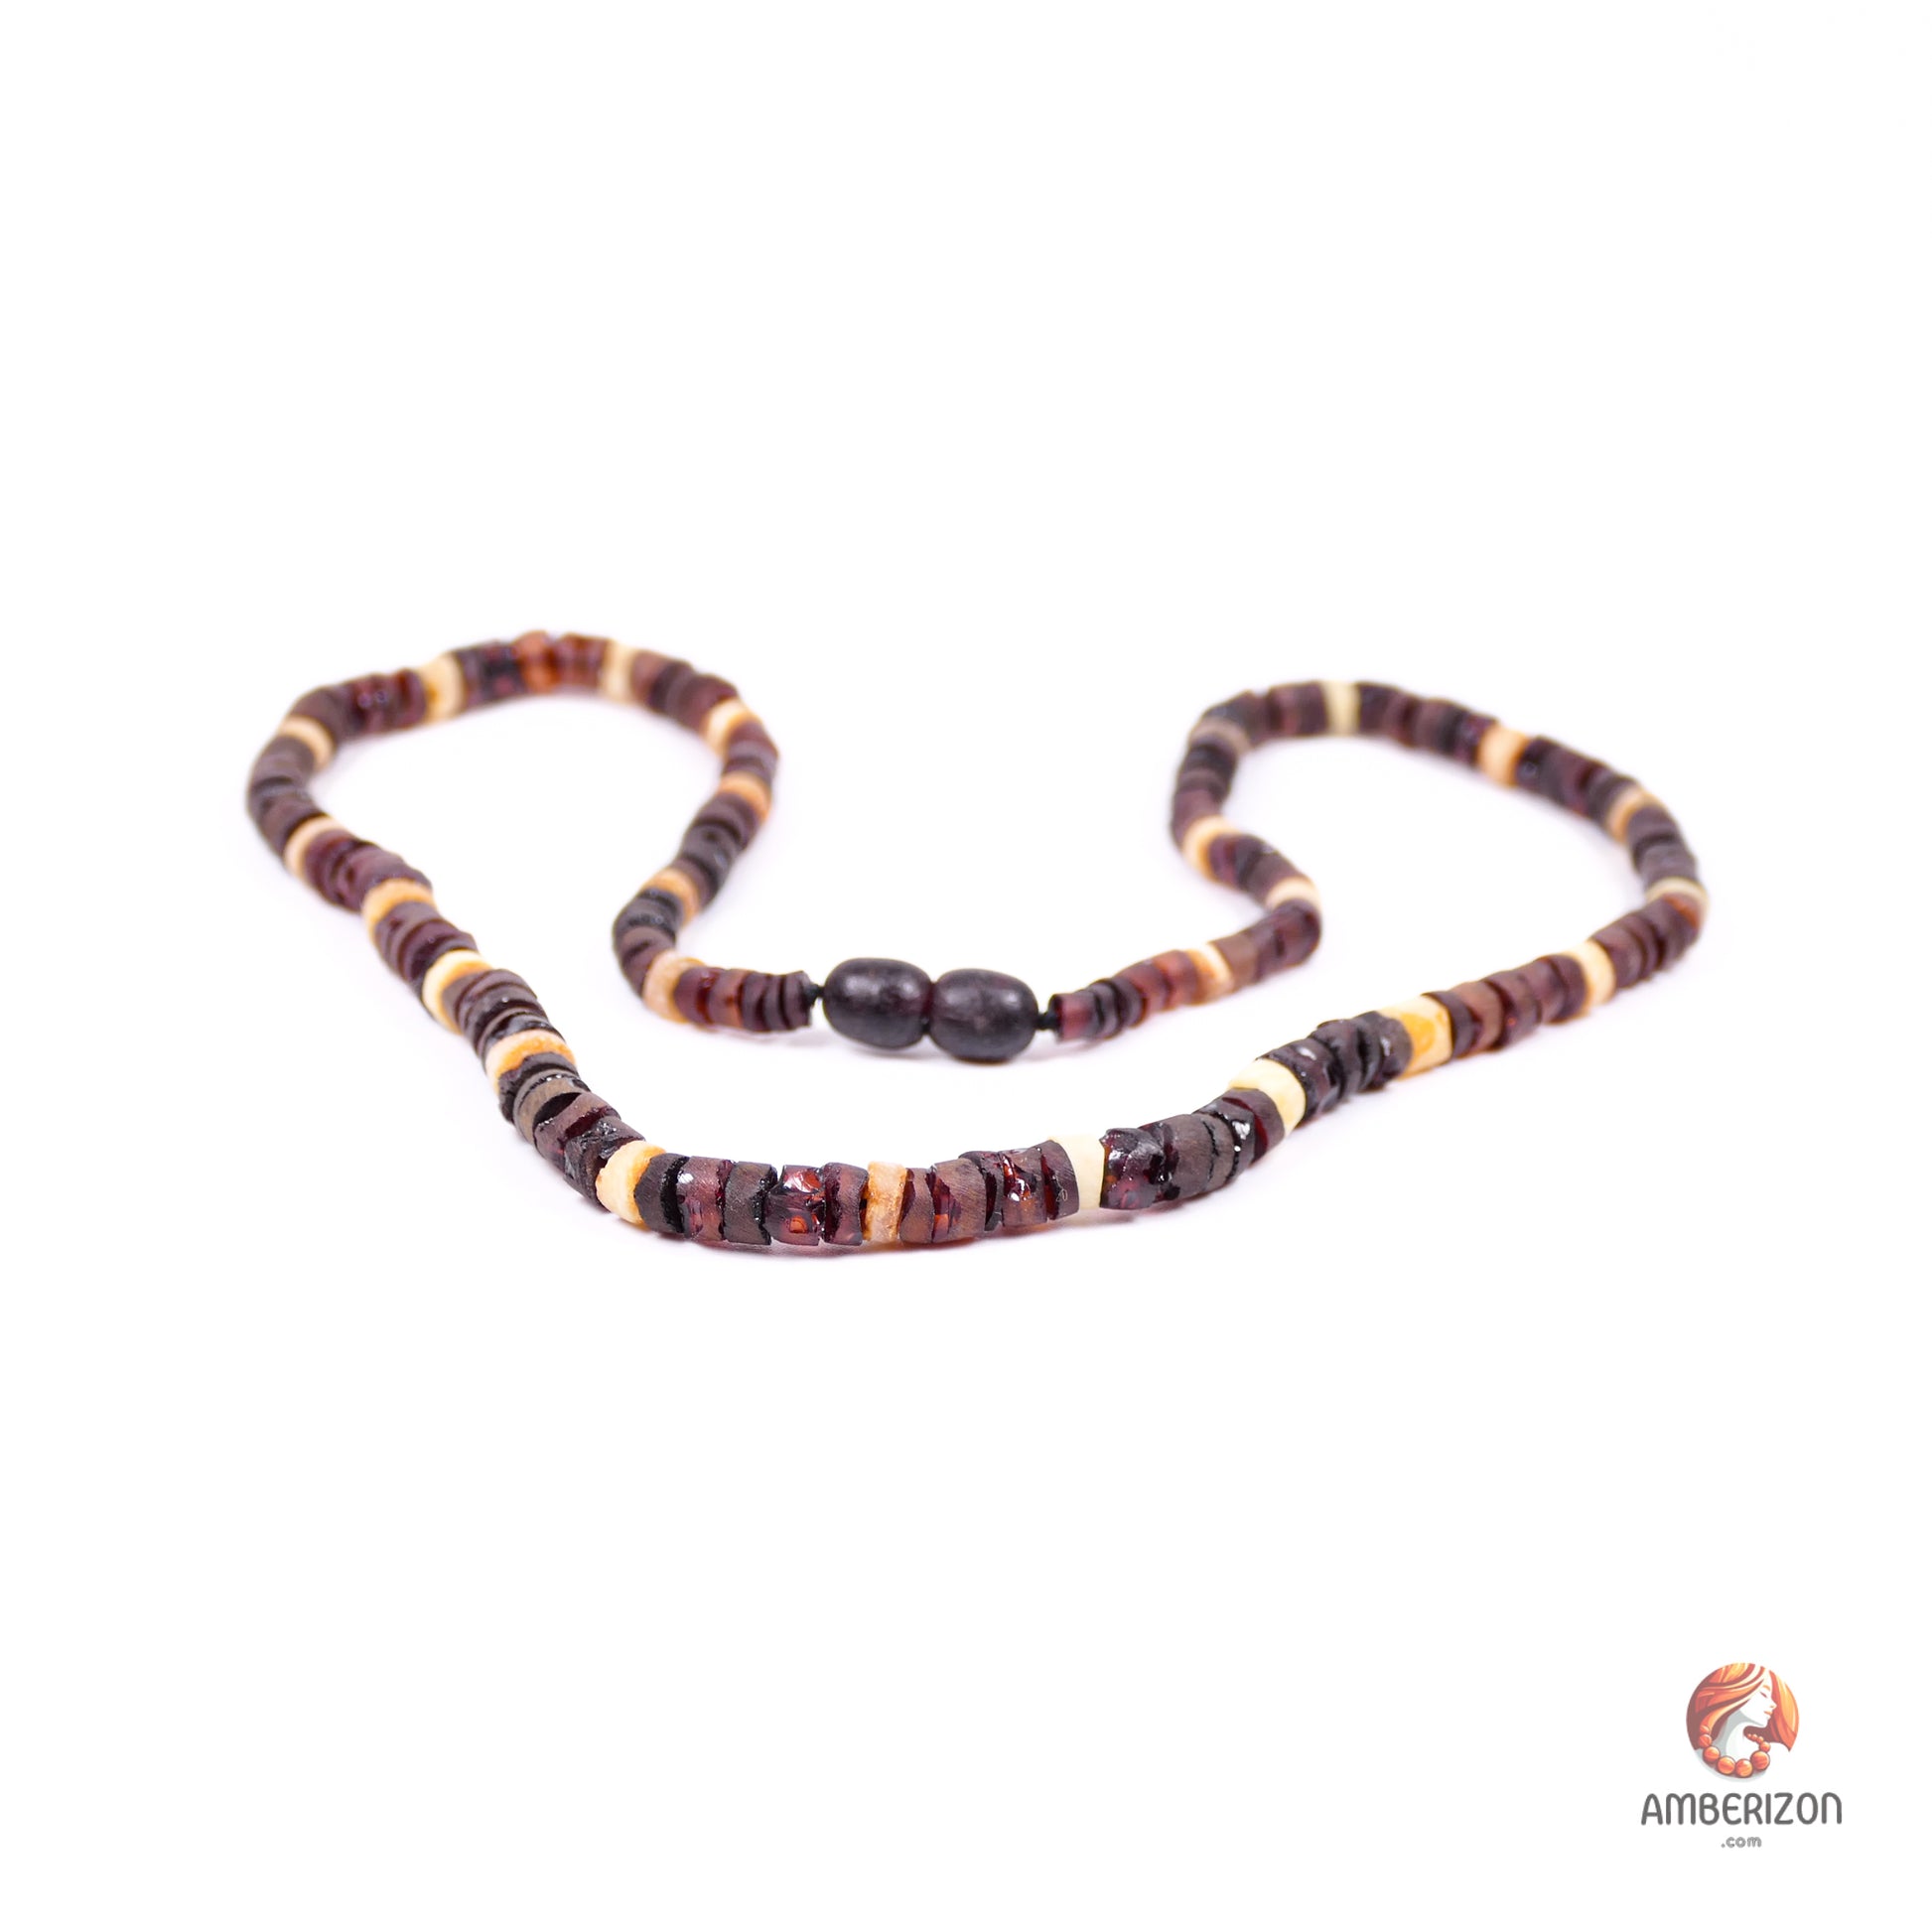 Cherry and honey raw amber necklaces for adults - Unisex amber jewelry